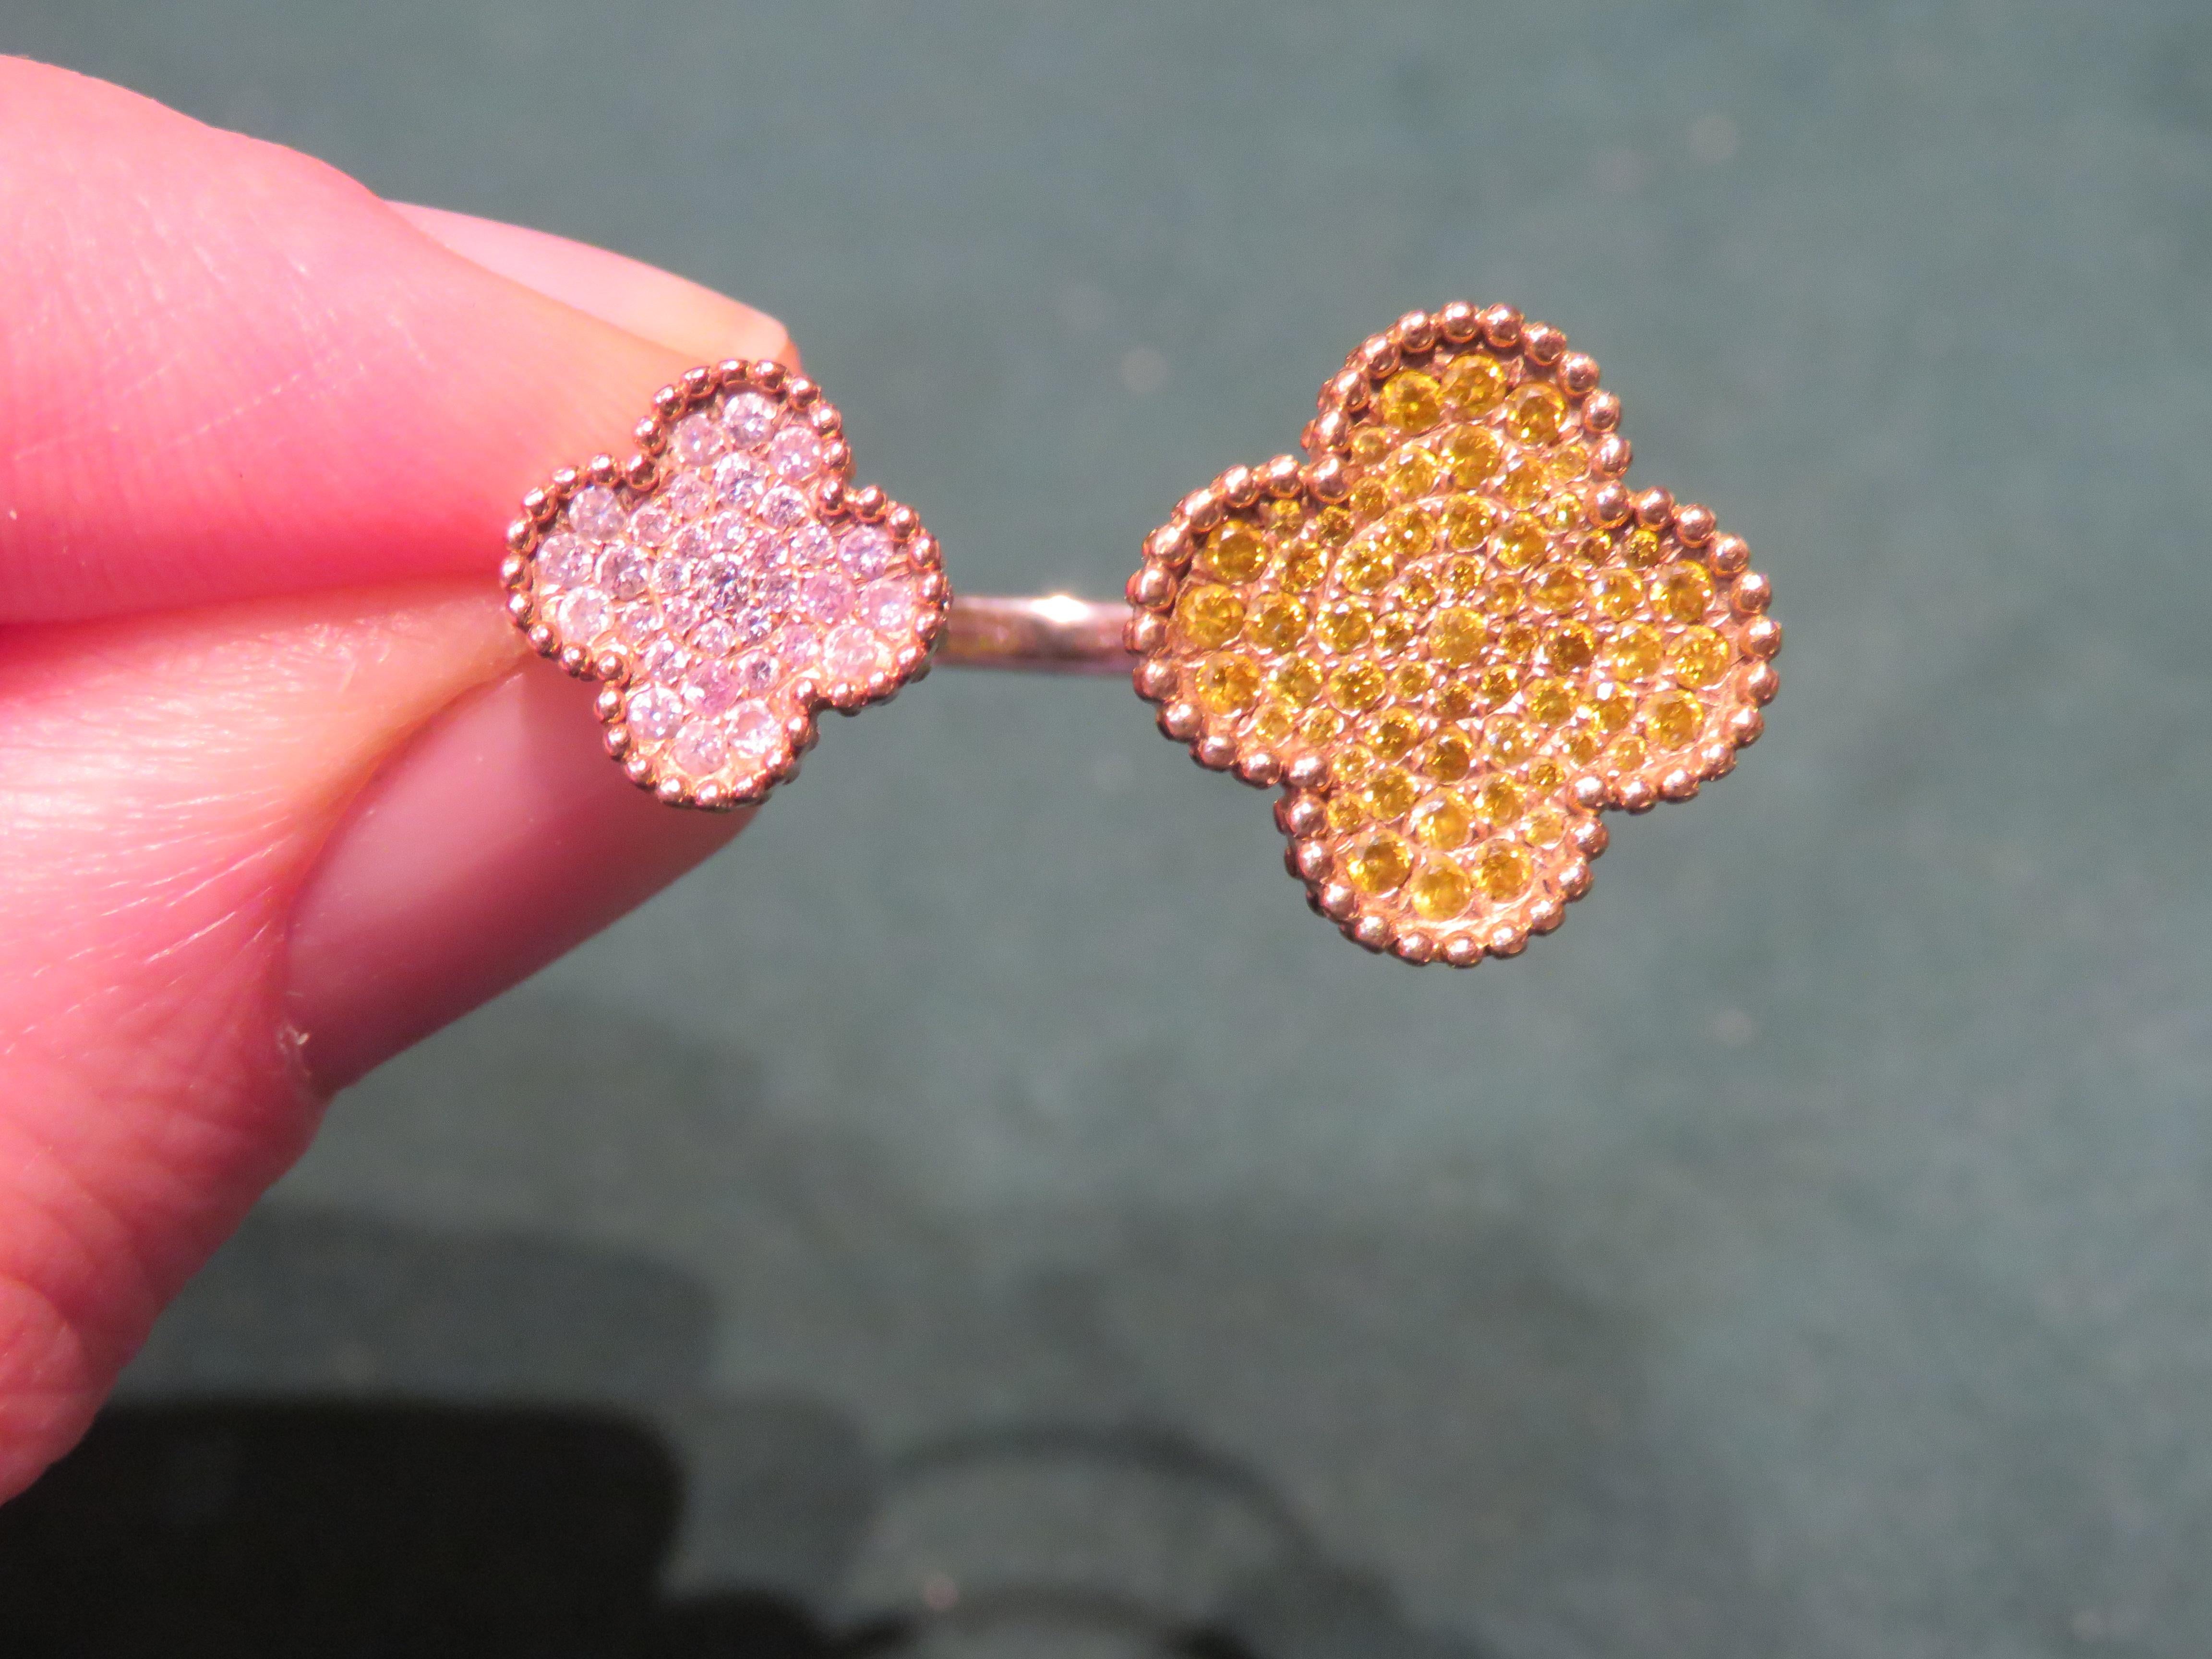 The Following Item we are offering is A Rare 18KT Gold Fancy Large Fancy Yellow Diamond Pink Diamond Clover Ring. Ring is comprised of Finely Set Glittering Gorgeous Fancy Yellow Diamonds forming a Large Clover and Fancy Pink Diamonds forming a